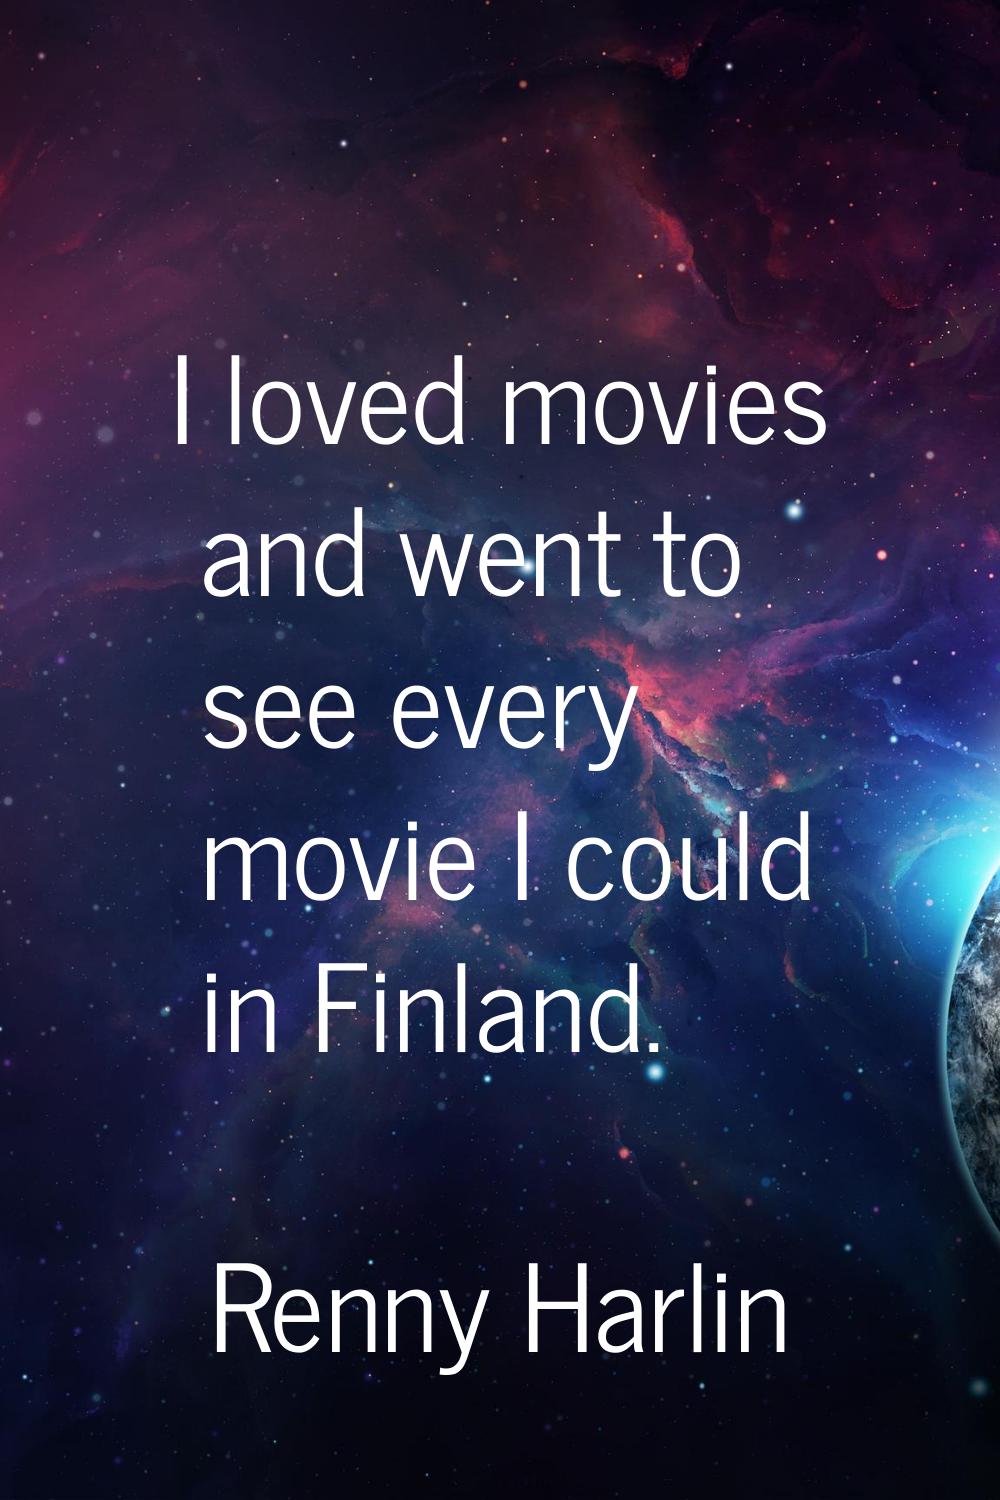 I loved movies and went to see every movie I could in Finland.